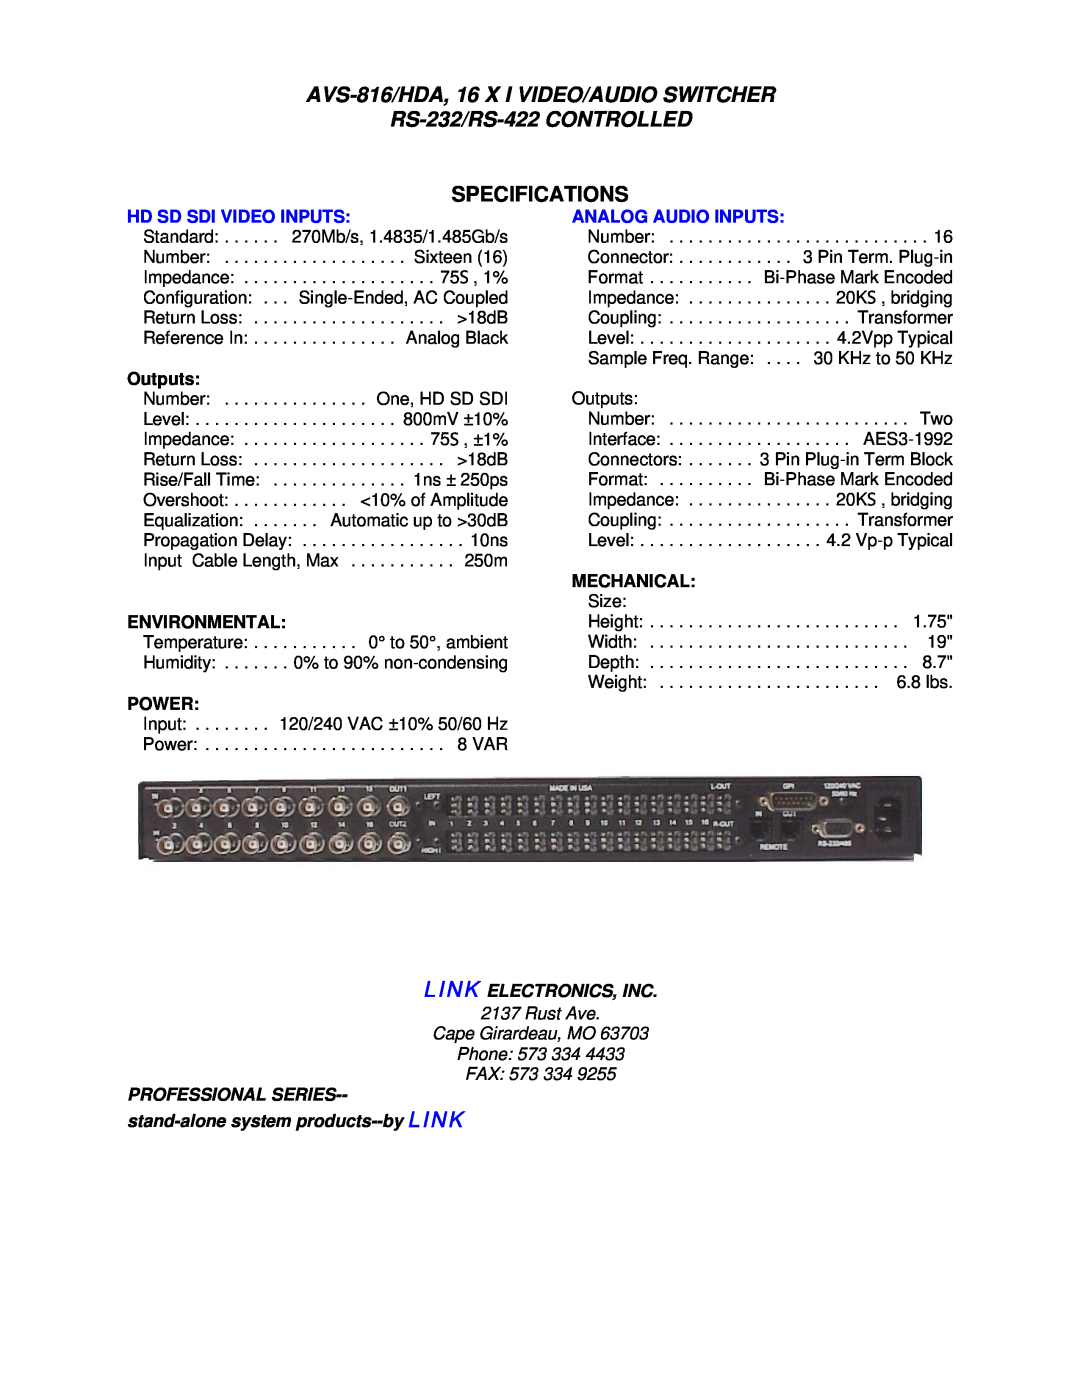 Link electronic AVS-816/HDA, 16 X I VIDEO/AUDIO SWITCHER RS-232/RS-422 CONTROLLED, Specifications, Analog Audio Inputs 